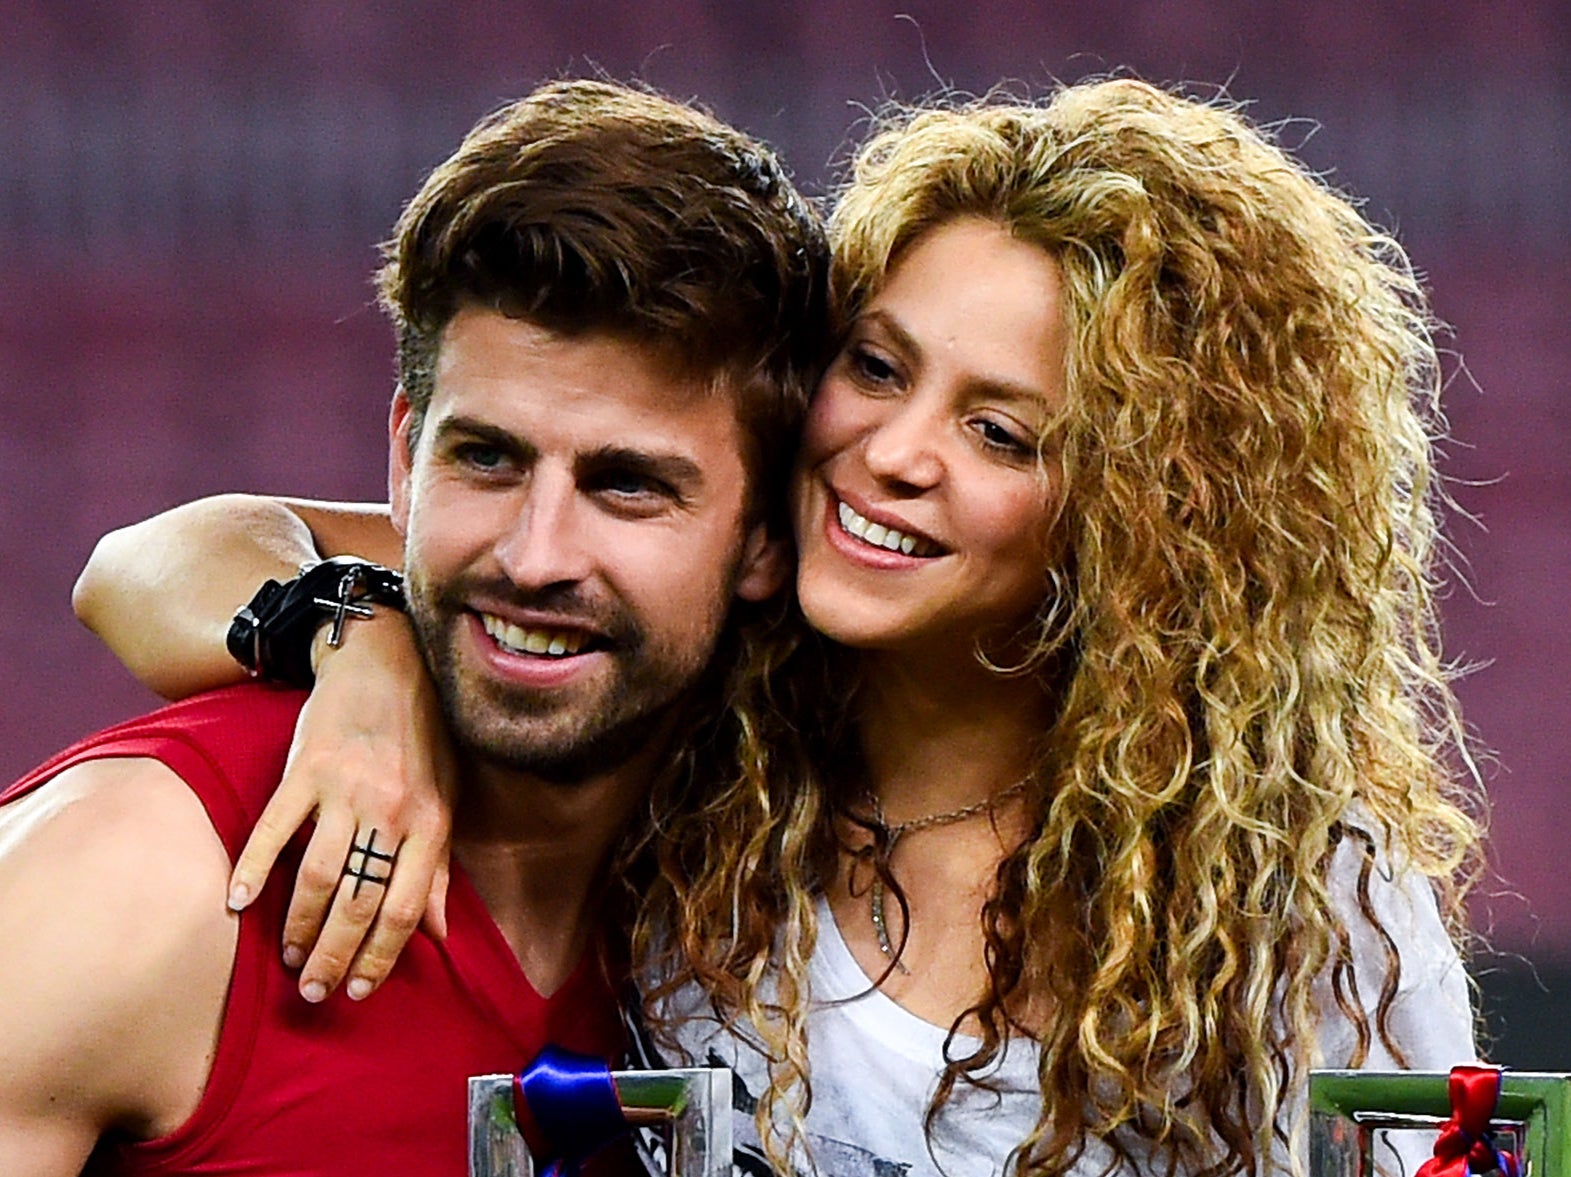 Gerard Pique of FC Barcelona and Shakira pose with the trophy after FC Barcelona won the Copa del Rey Final in 2015